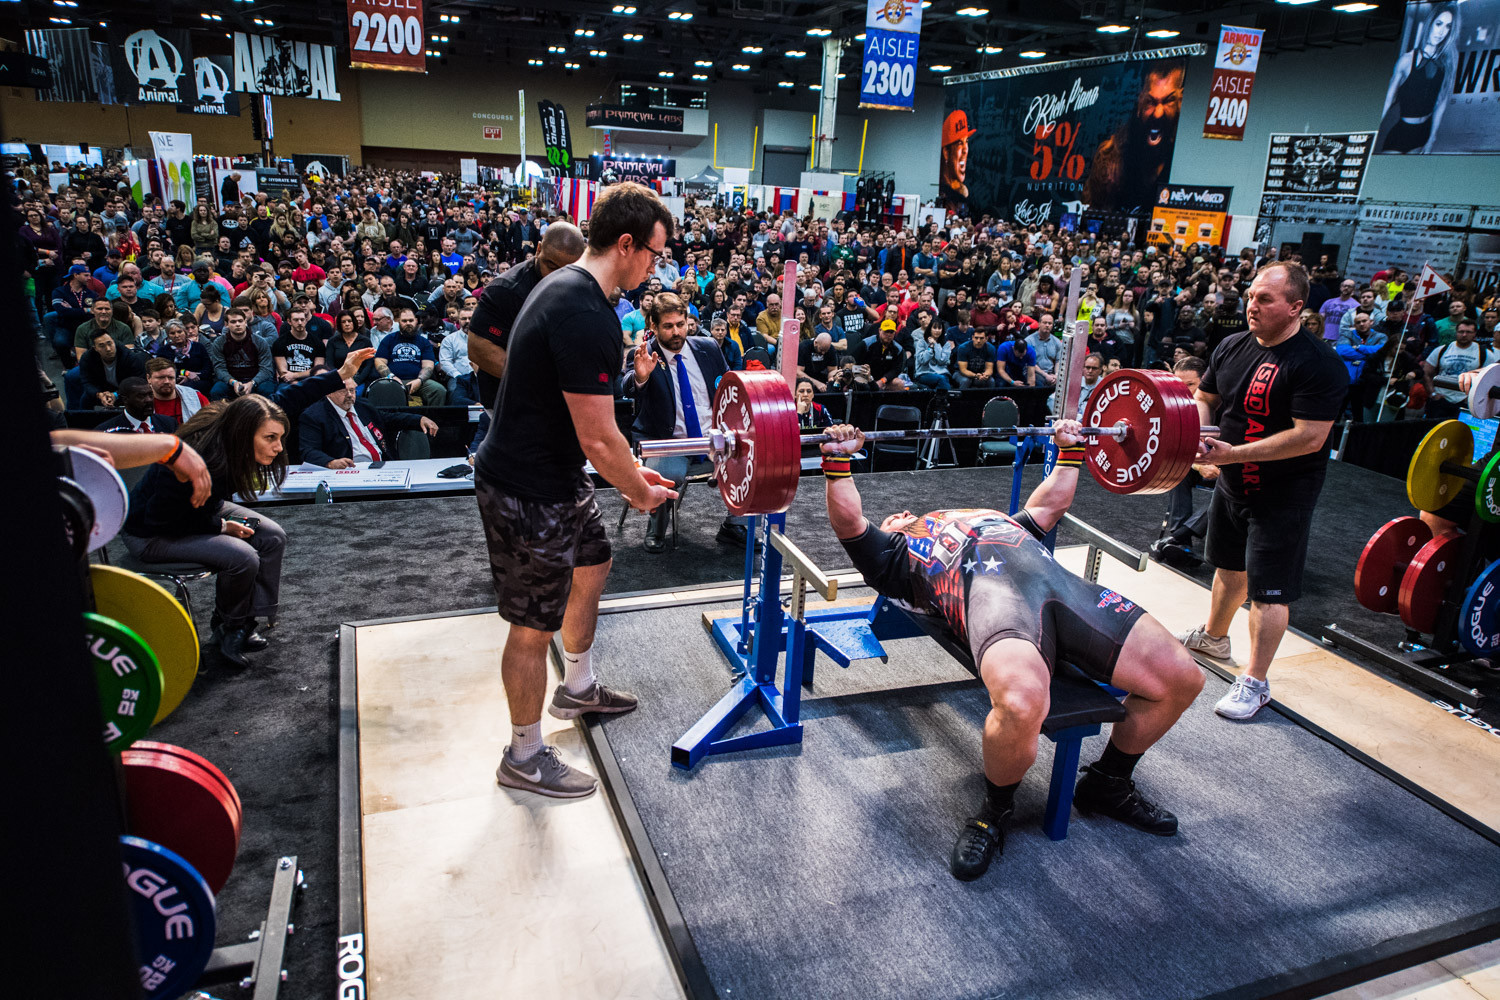 United States could quit international powerlifting after being told